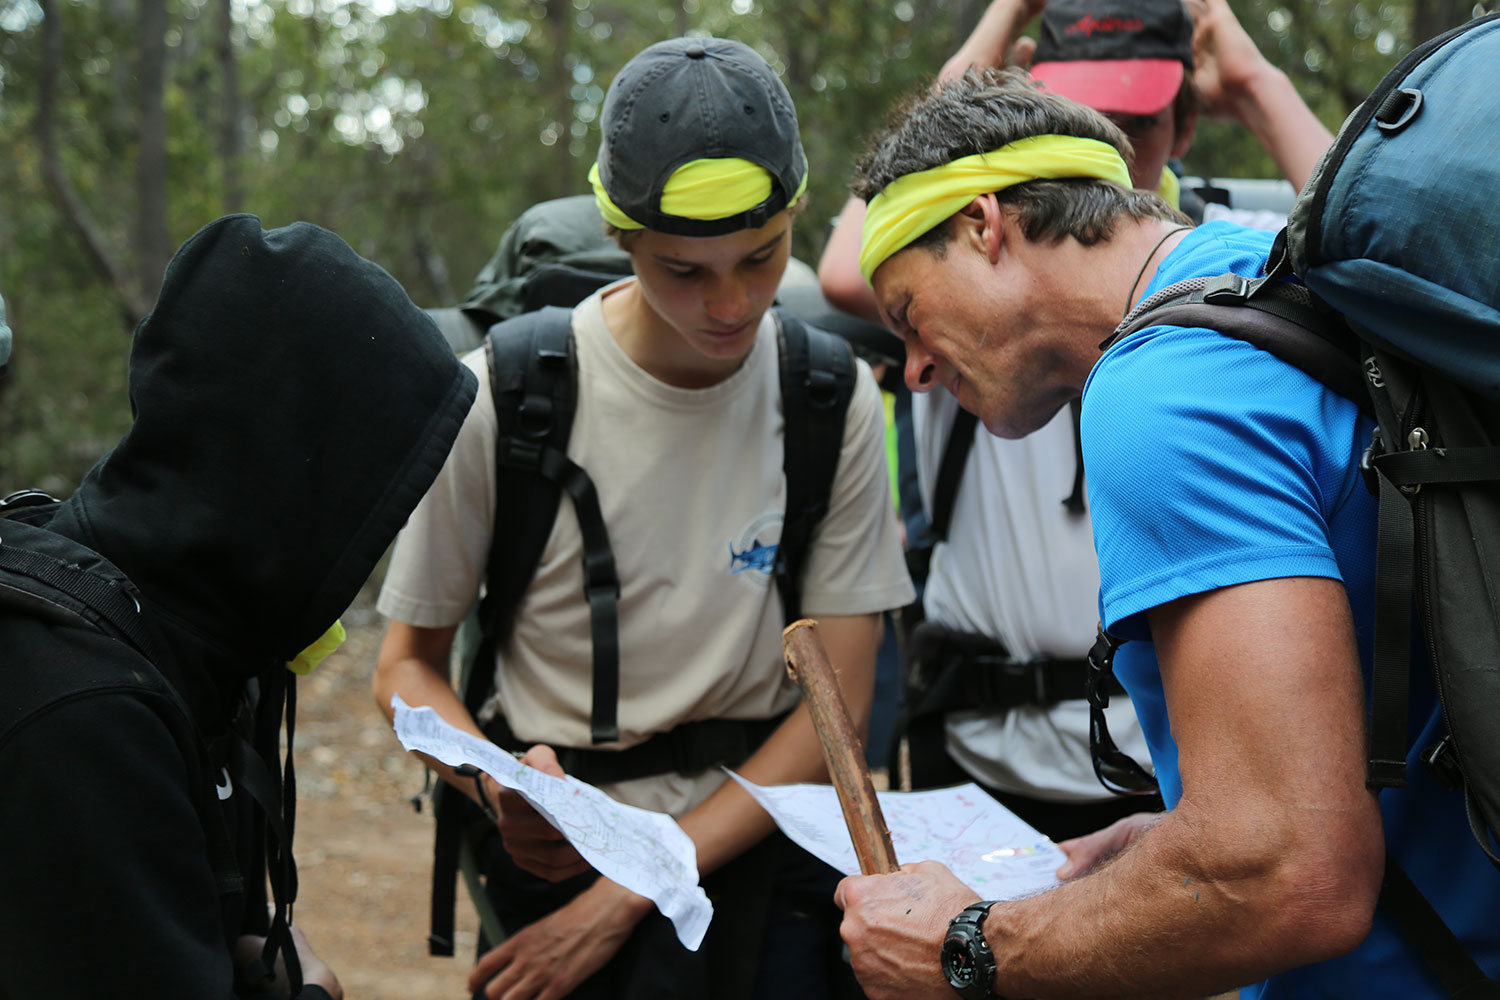 AdventureWorks WA - We're ready for the green light. #adventureworks #expedition #schoolcamp